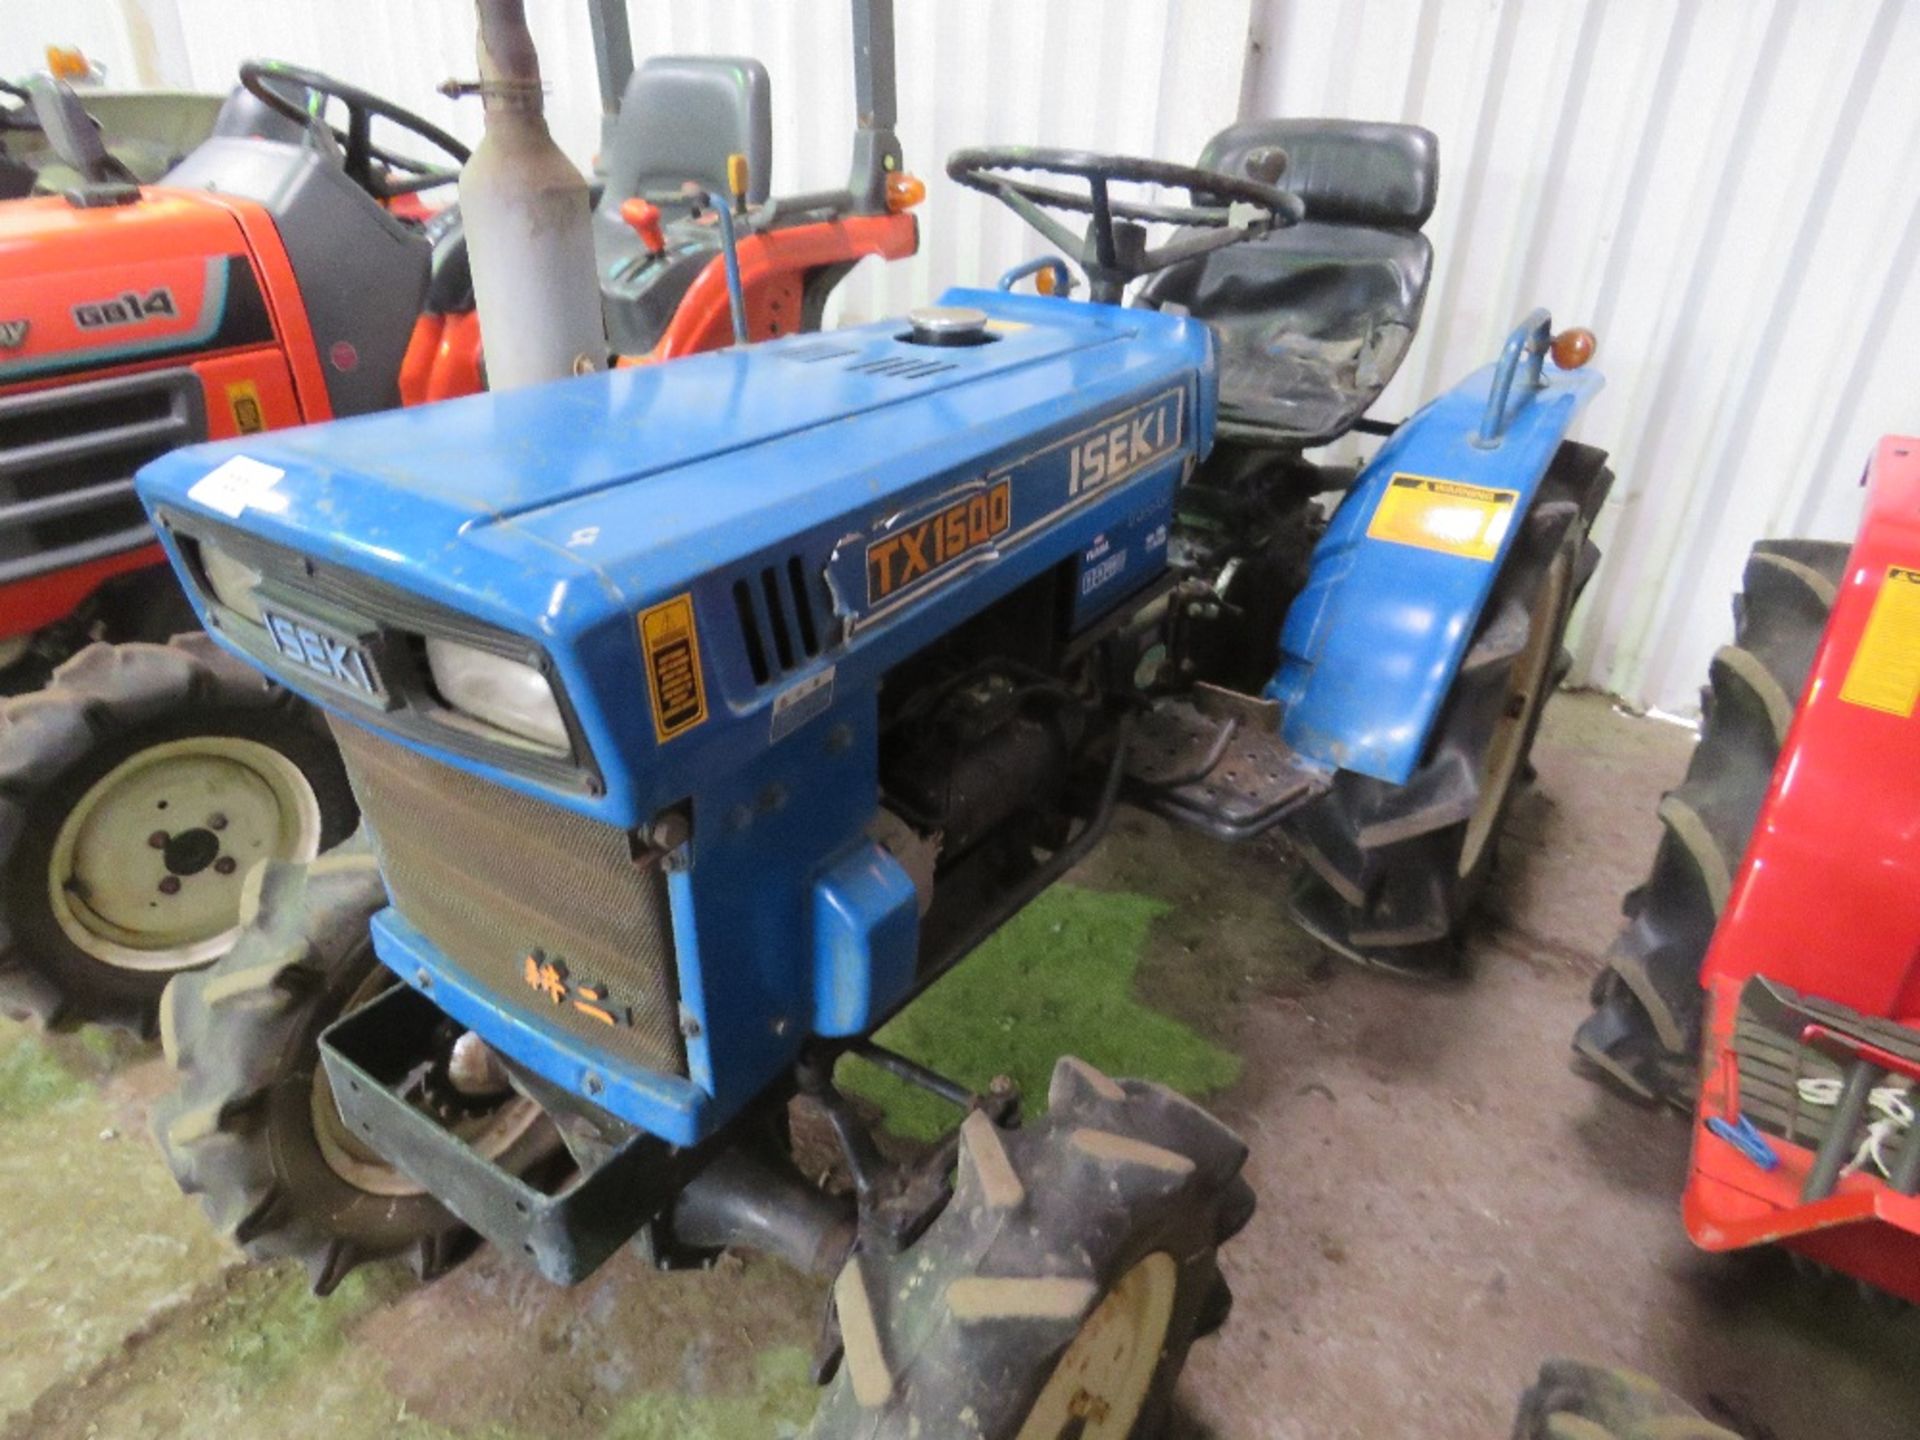 ISEKI TX1500 4WD COMPACT TRACTOR WITH REAR LINKAGE WHEN TESTED WAS SEEN TO START, DRIVE, STEER AND B - Image 2 of 3